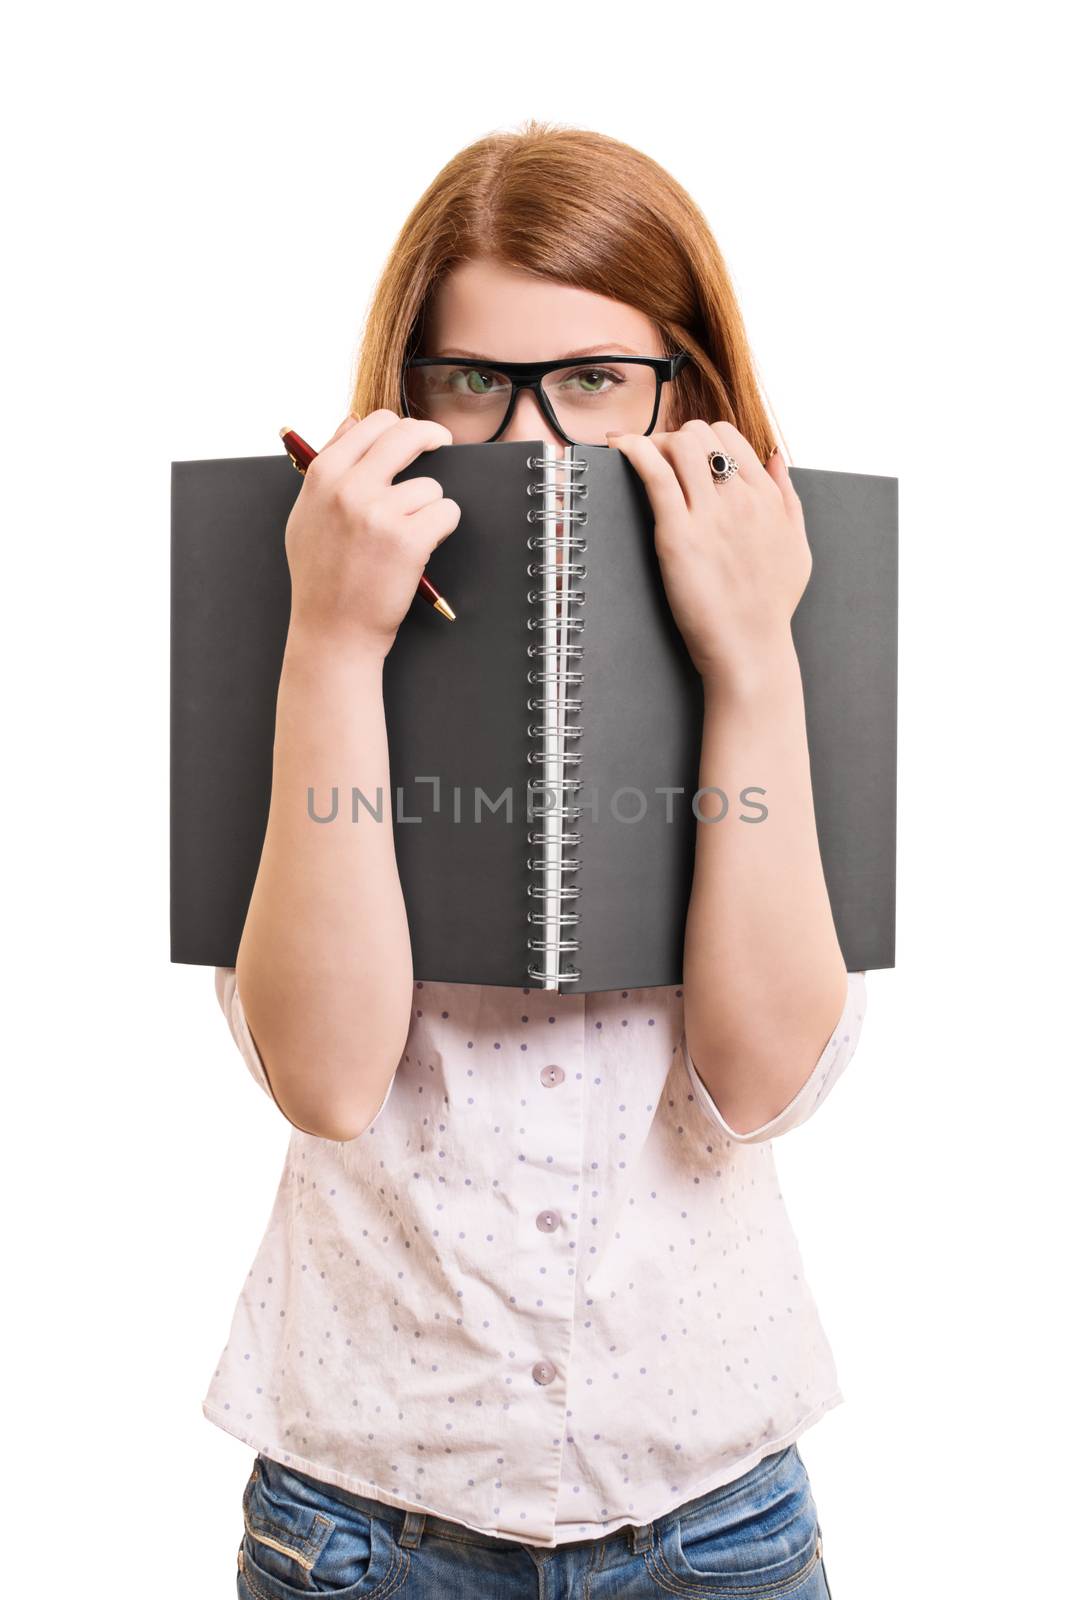 A portrait of a young female student hiding behind her book, isolated on white background.